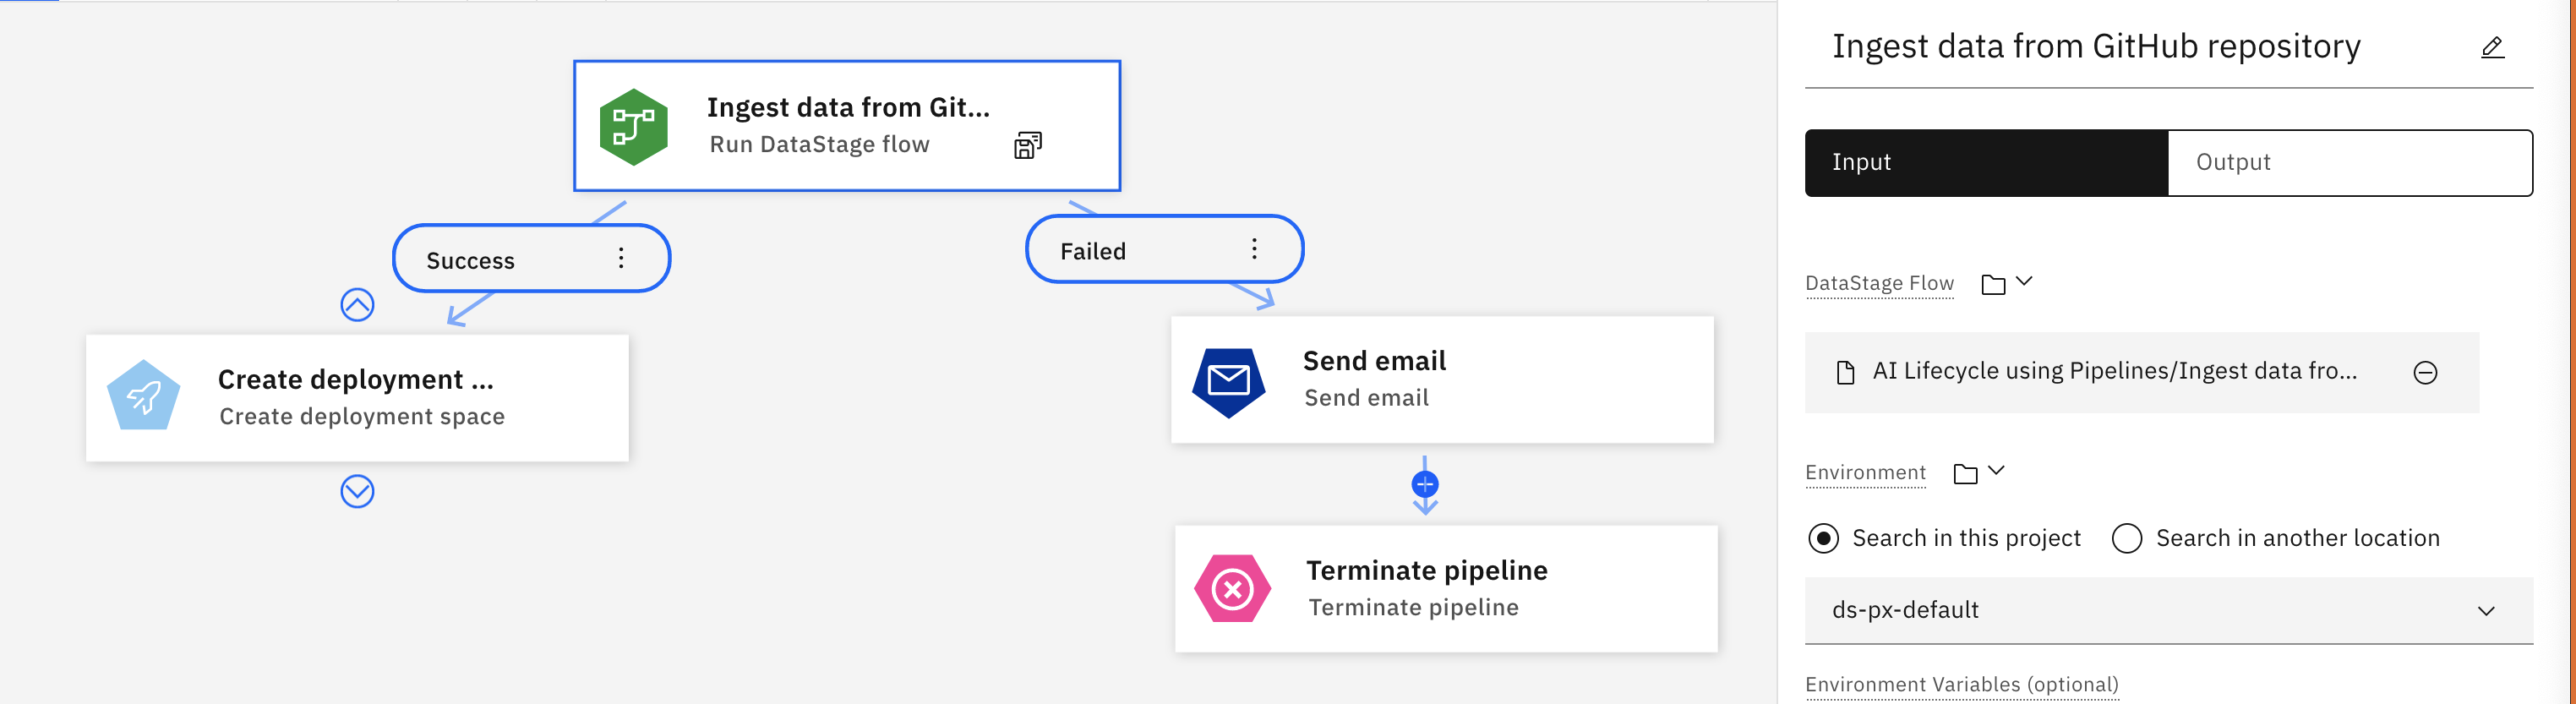 Running a DataStage flow in a pipeline